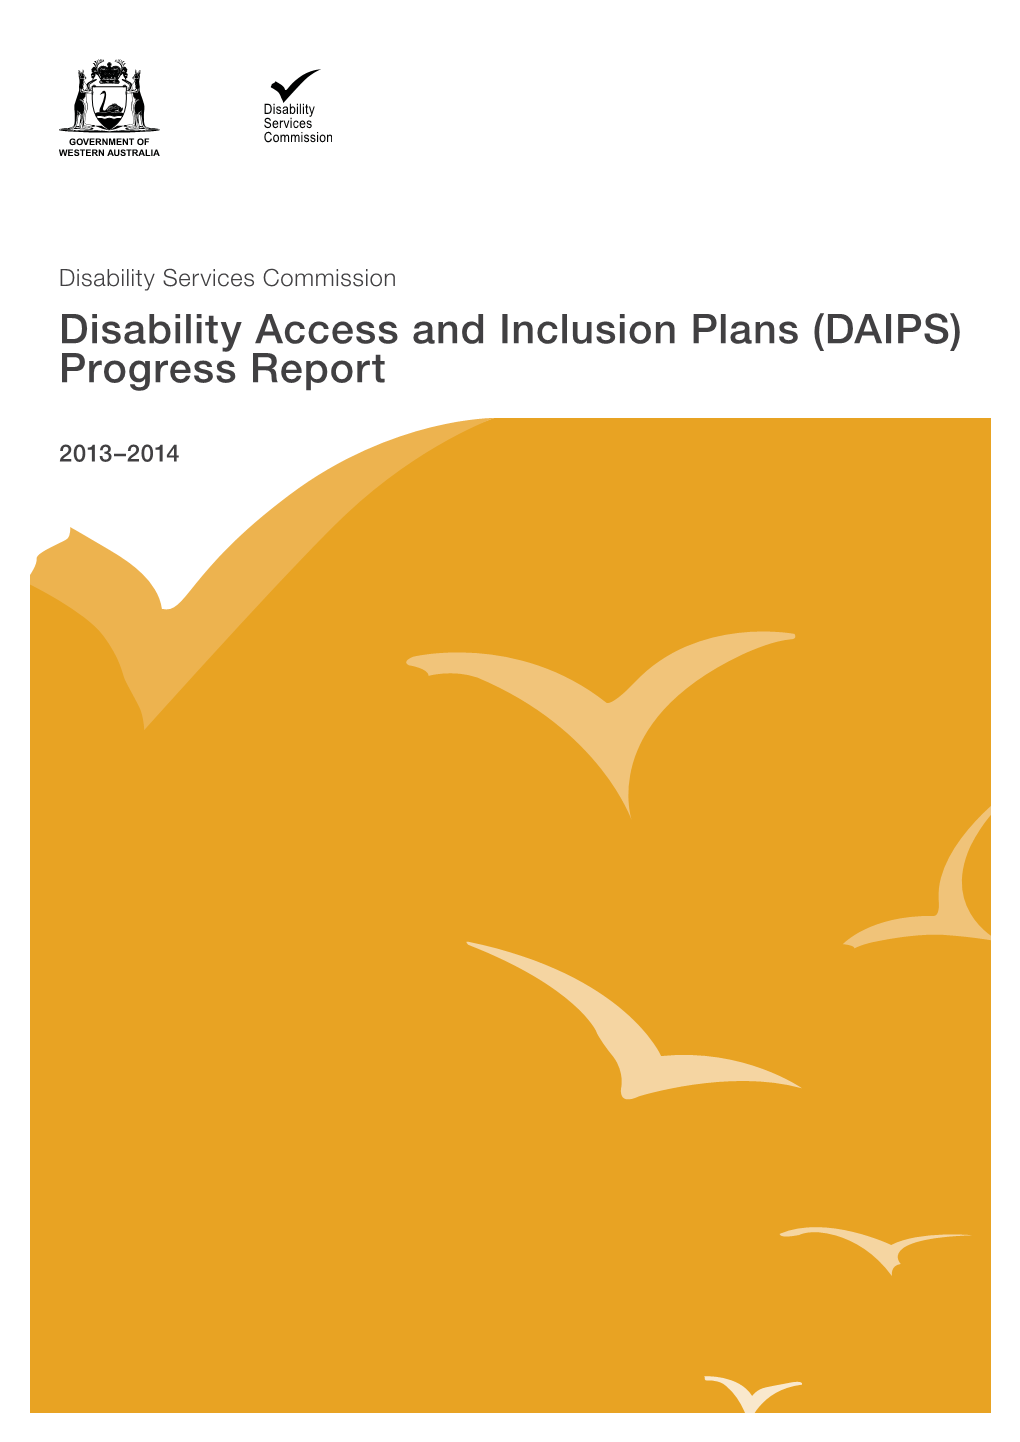 Disability Access and Inclusion Plans (DAIPS) Progress Report